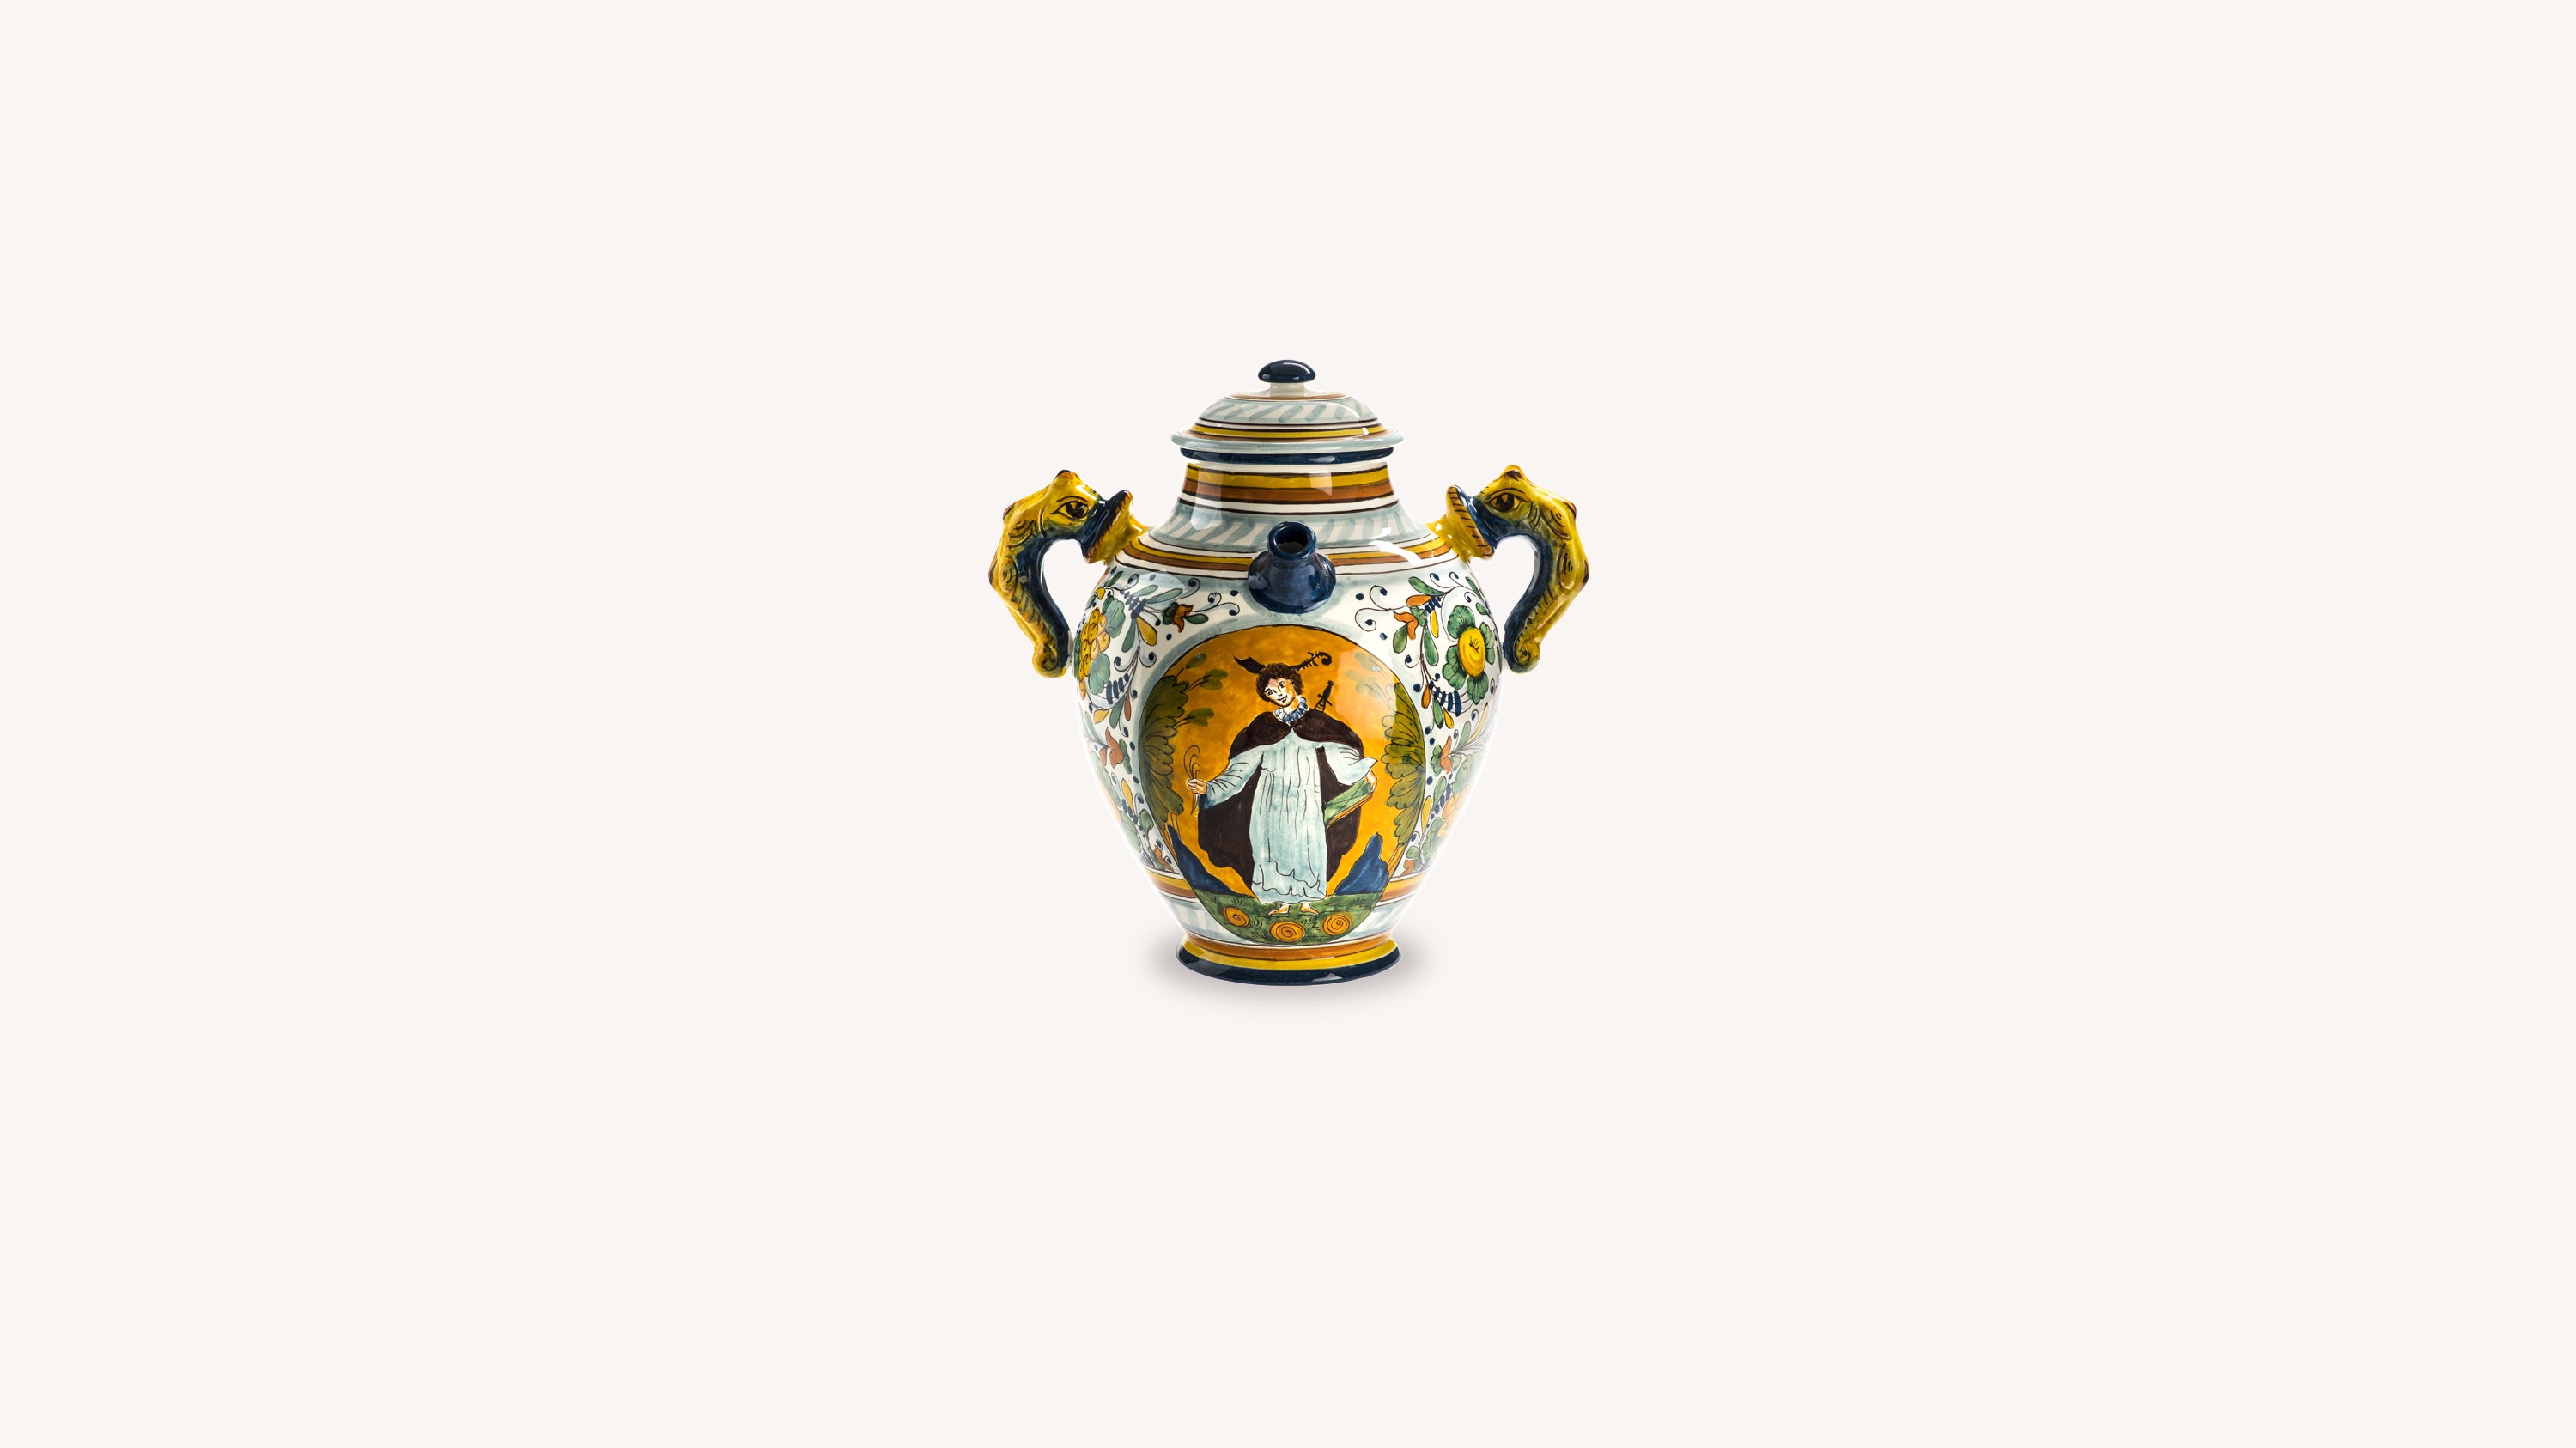 Ceramic Vase With St. Peter The Martyr Decoration